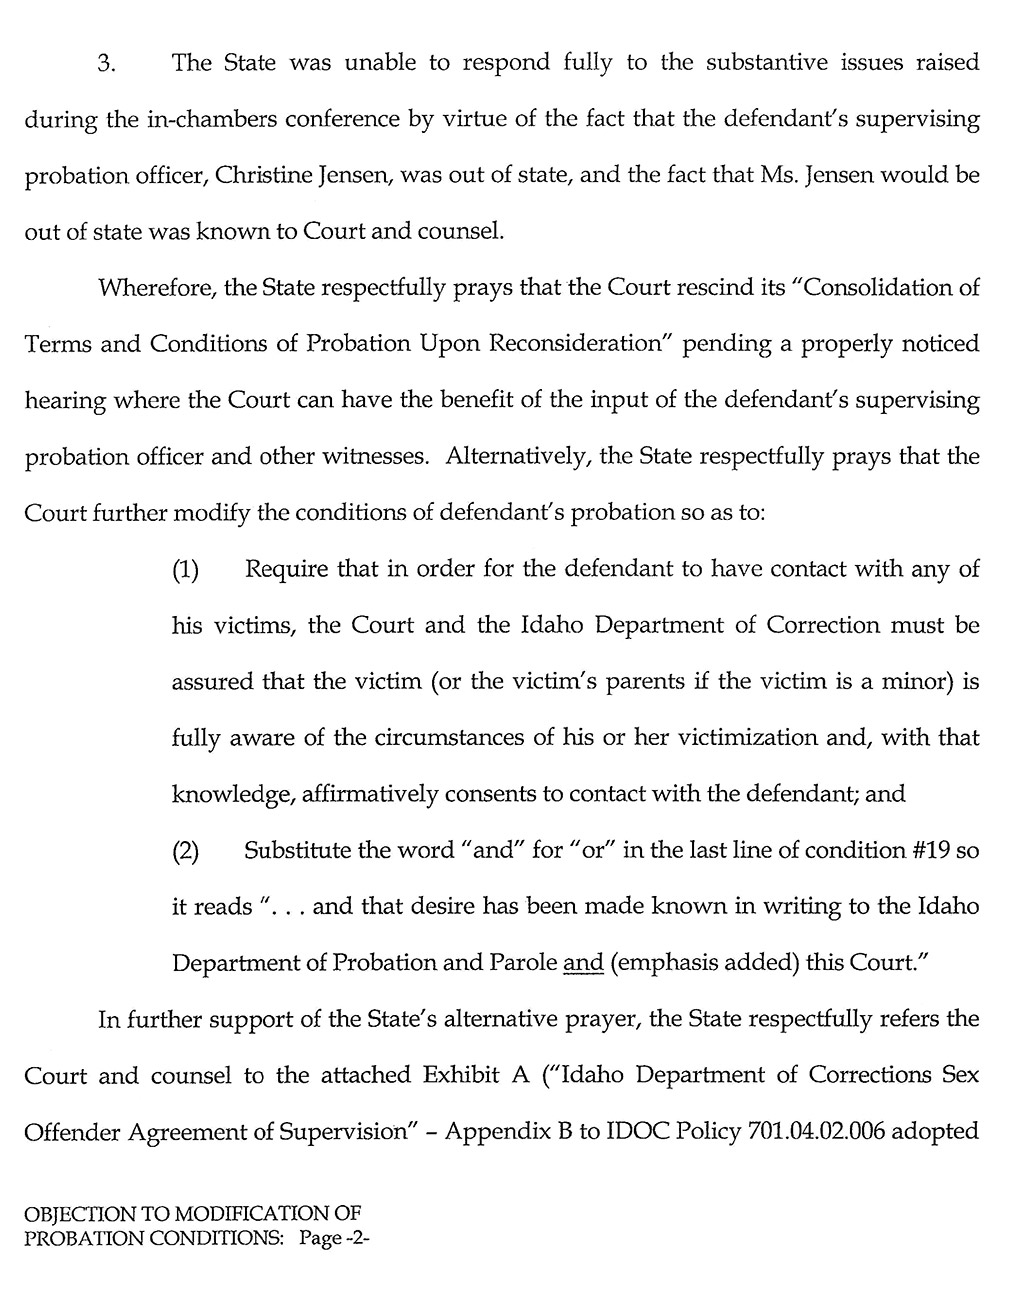 Objection to Modification of Probation Conditions page 2